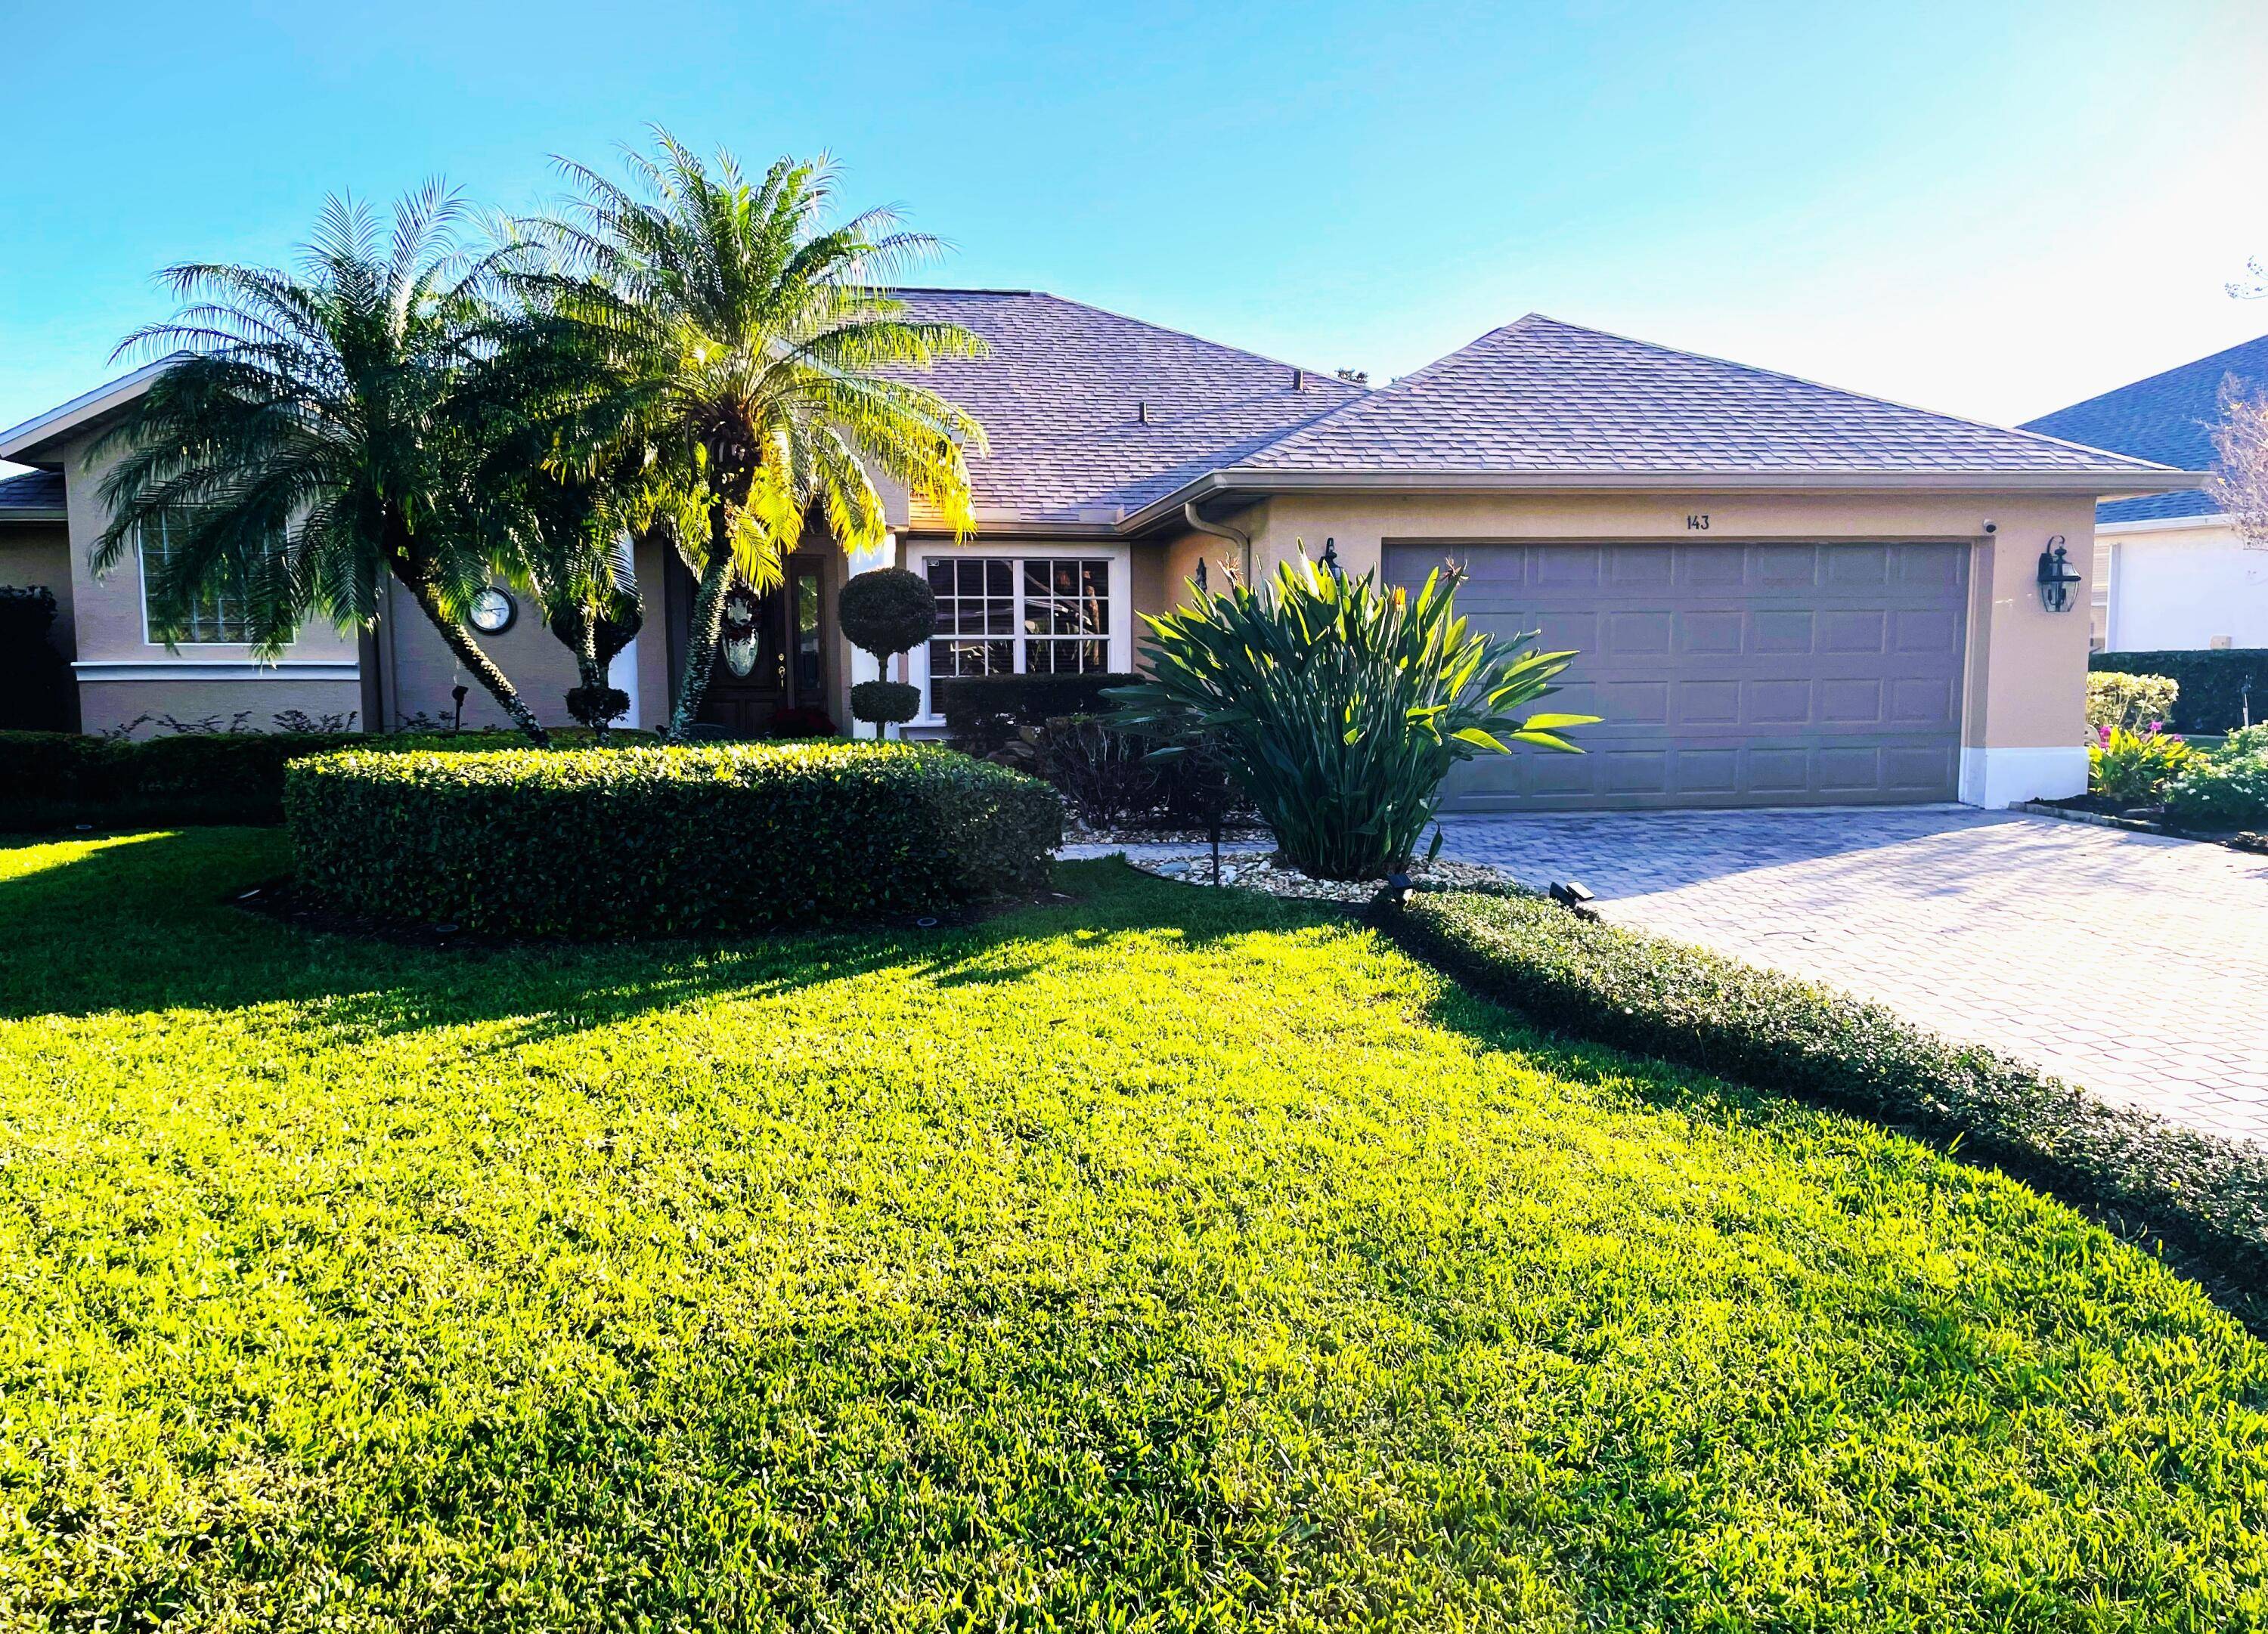 This split floor plan mint condition home is nestled in the desirable Crane Point subdivision in Sawgrass lakes.